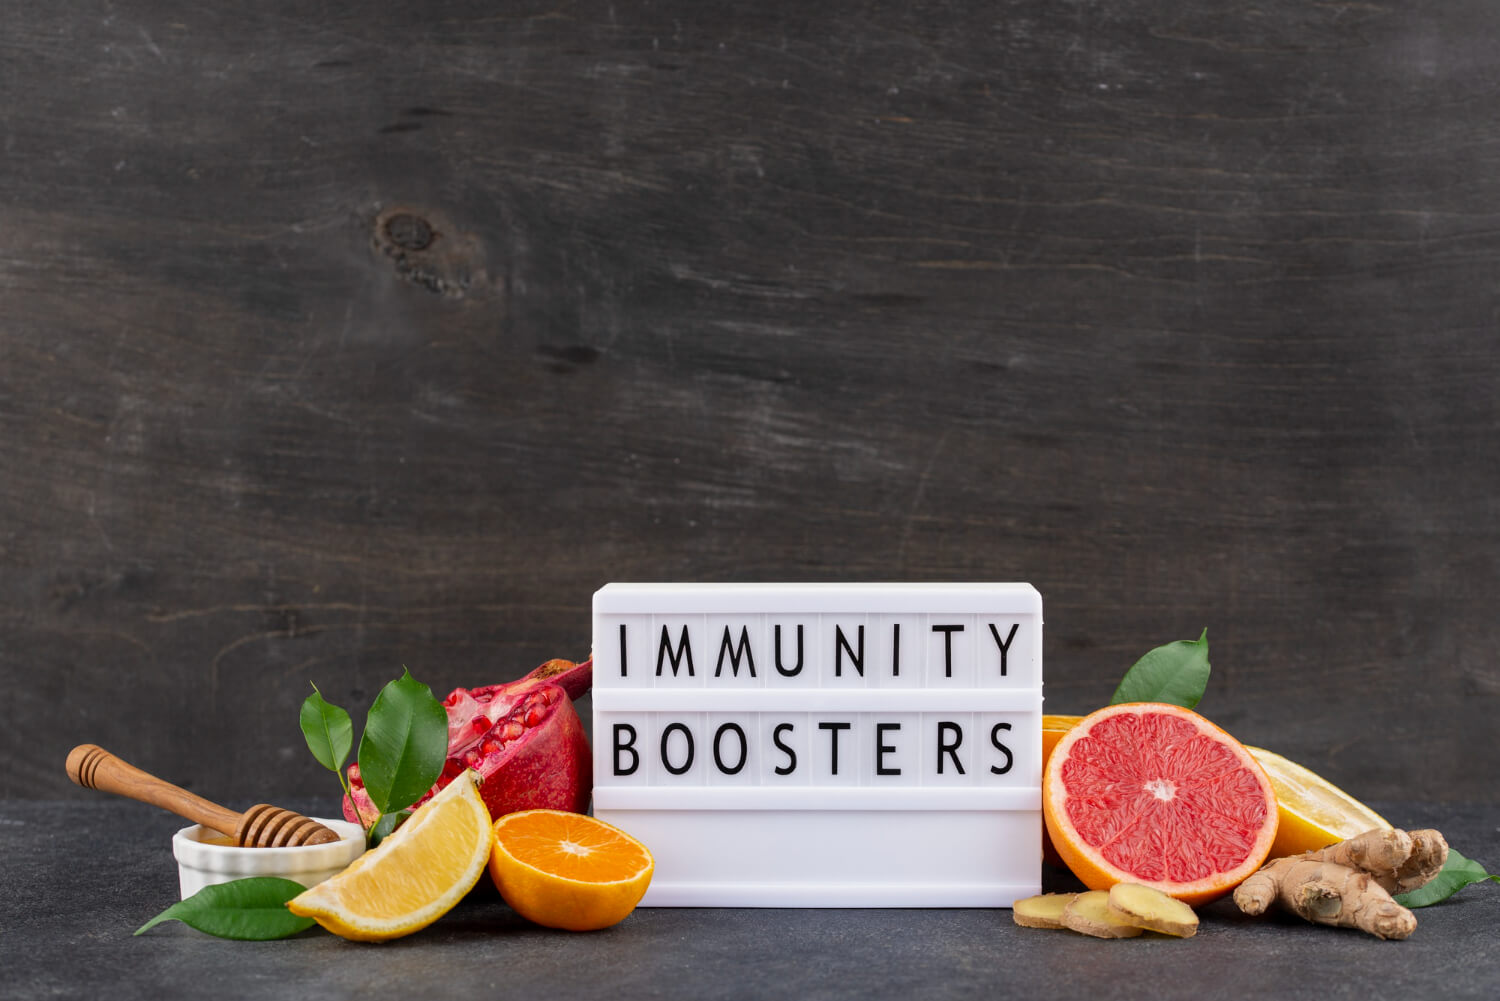 Supercharge Your Immunity